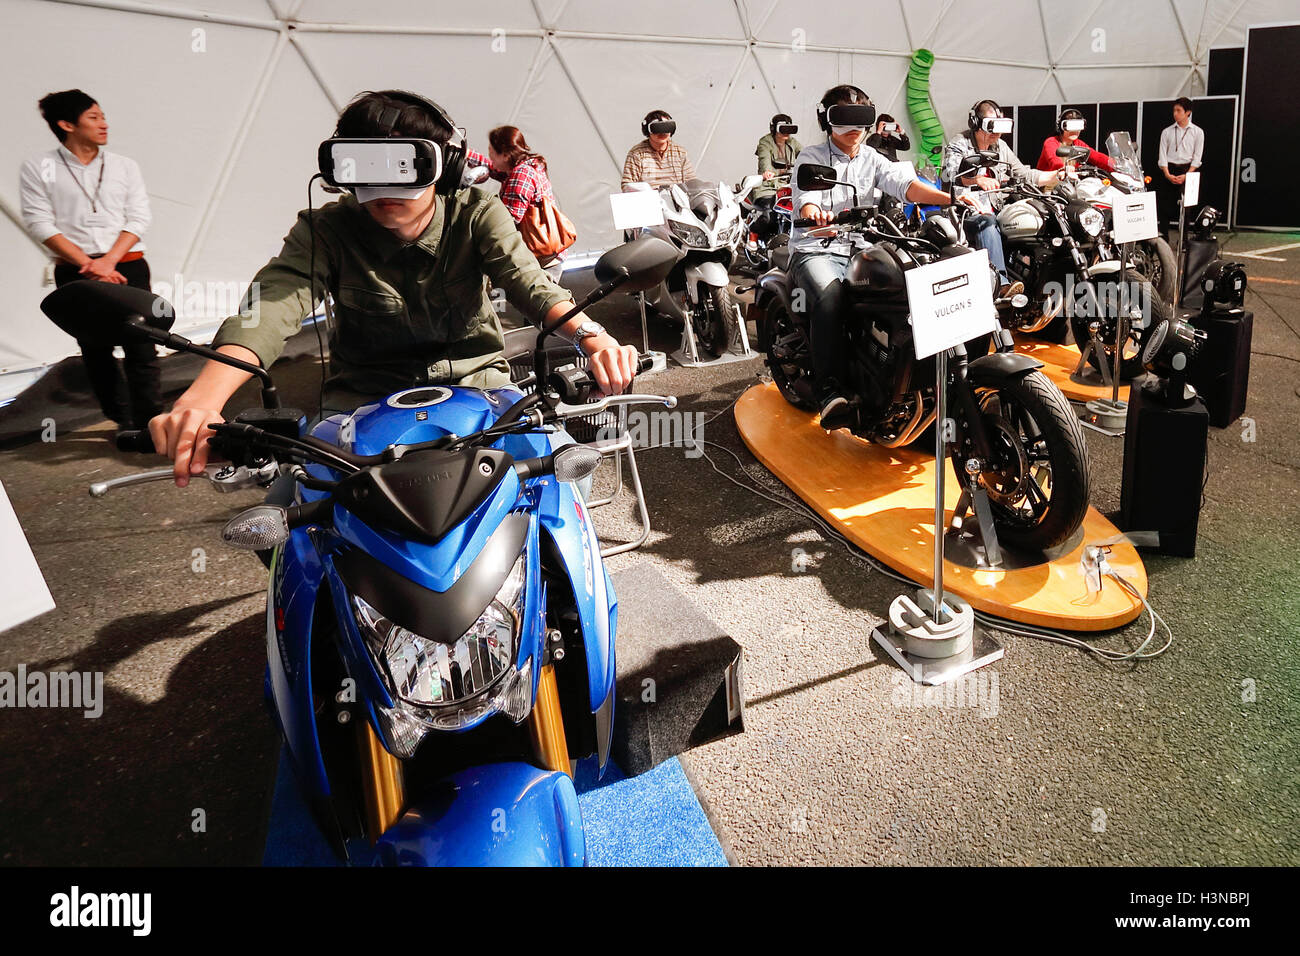 Tokyo Japan 10th October 16 Visitors Enjoy Virtual Reality Motorcycle Ride Simulators During The Tokyo Motor Fes 16 At Odaiba On October 10 16 Tokyo Japan The Annual Festival Provides An Opportunity